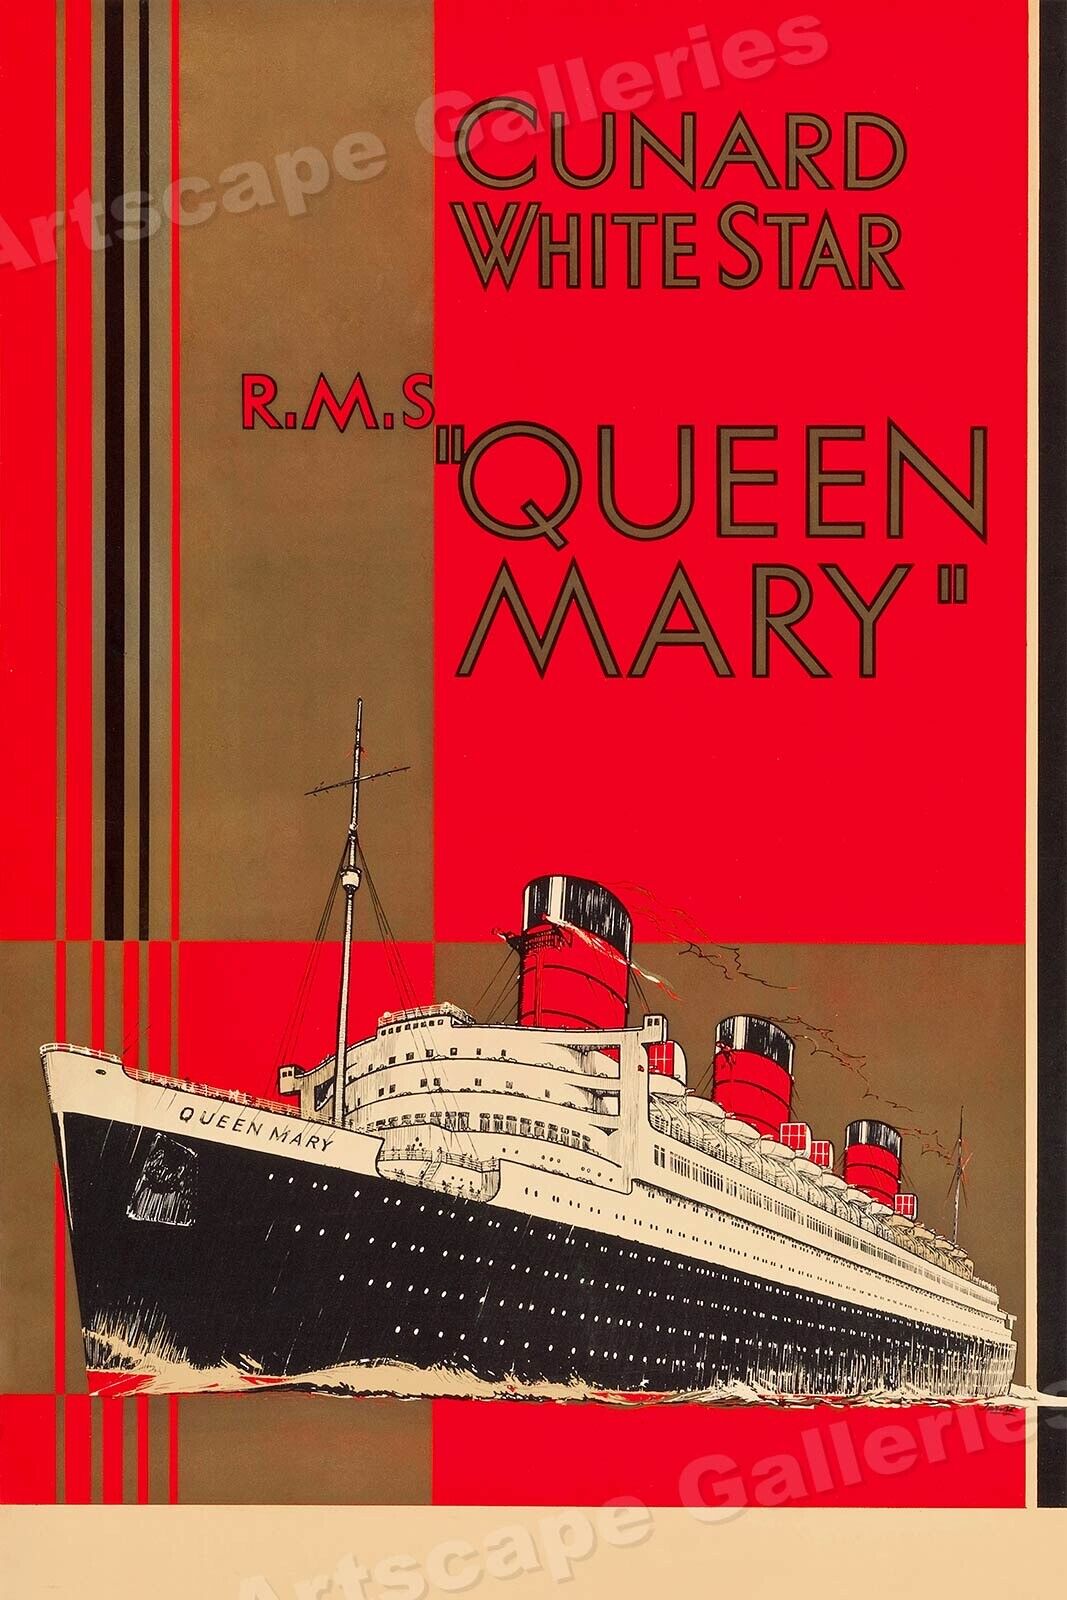 RMS Queen Mary Cunard White Star 1936 Vintage Style Travel Poster - 24x36